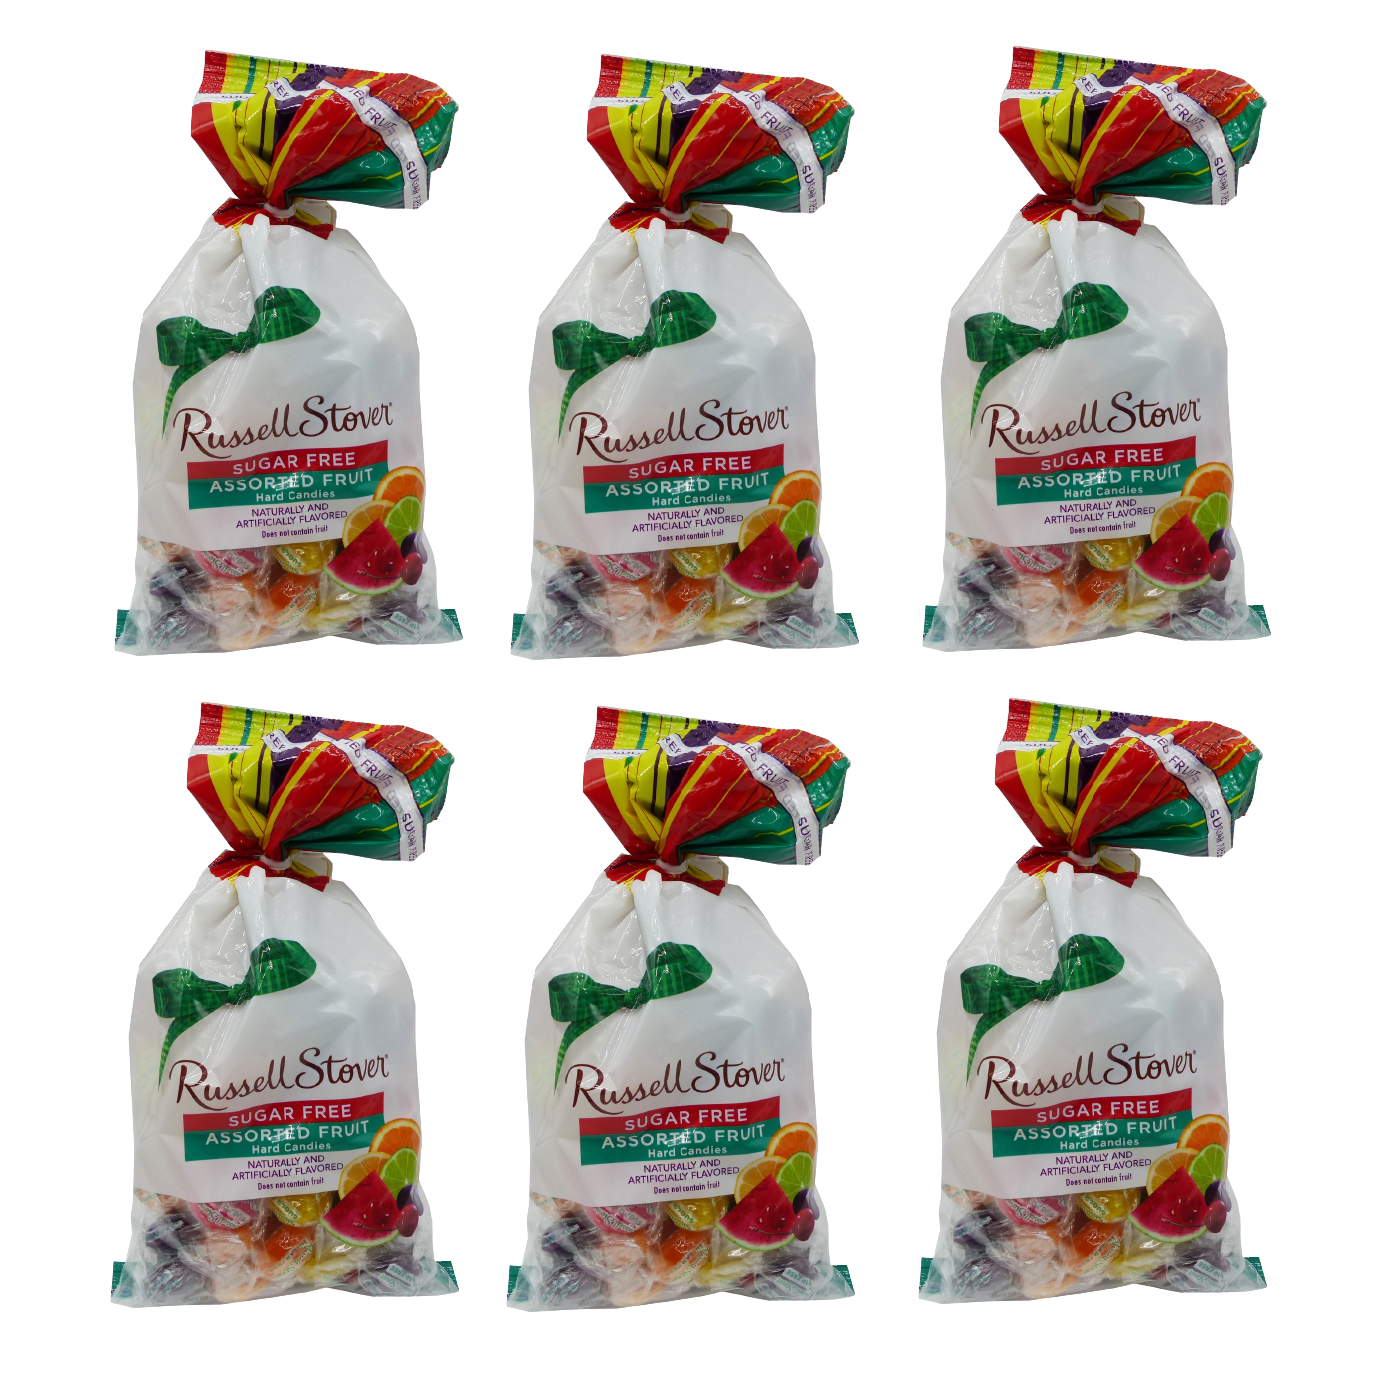 #Flavor_Assorted Fruit #Size_6 Bags